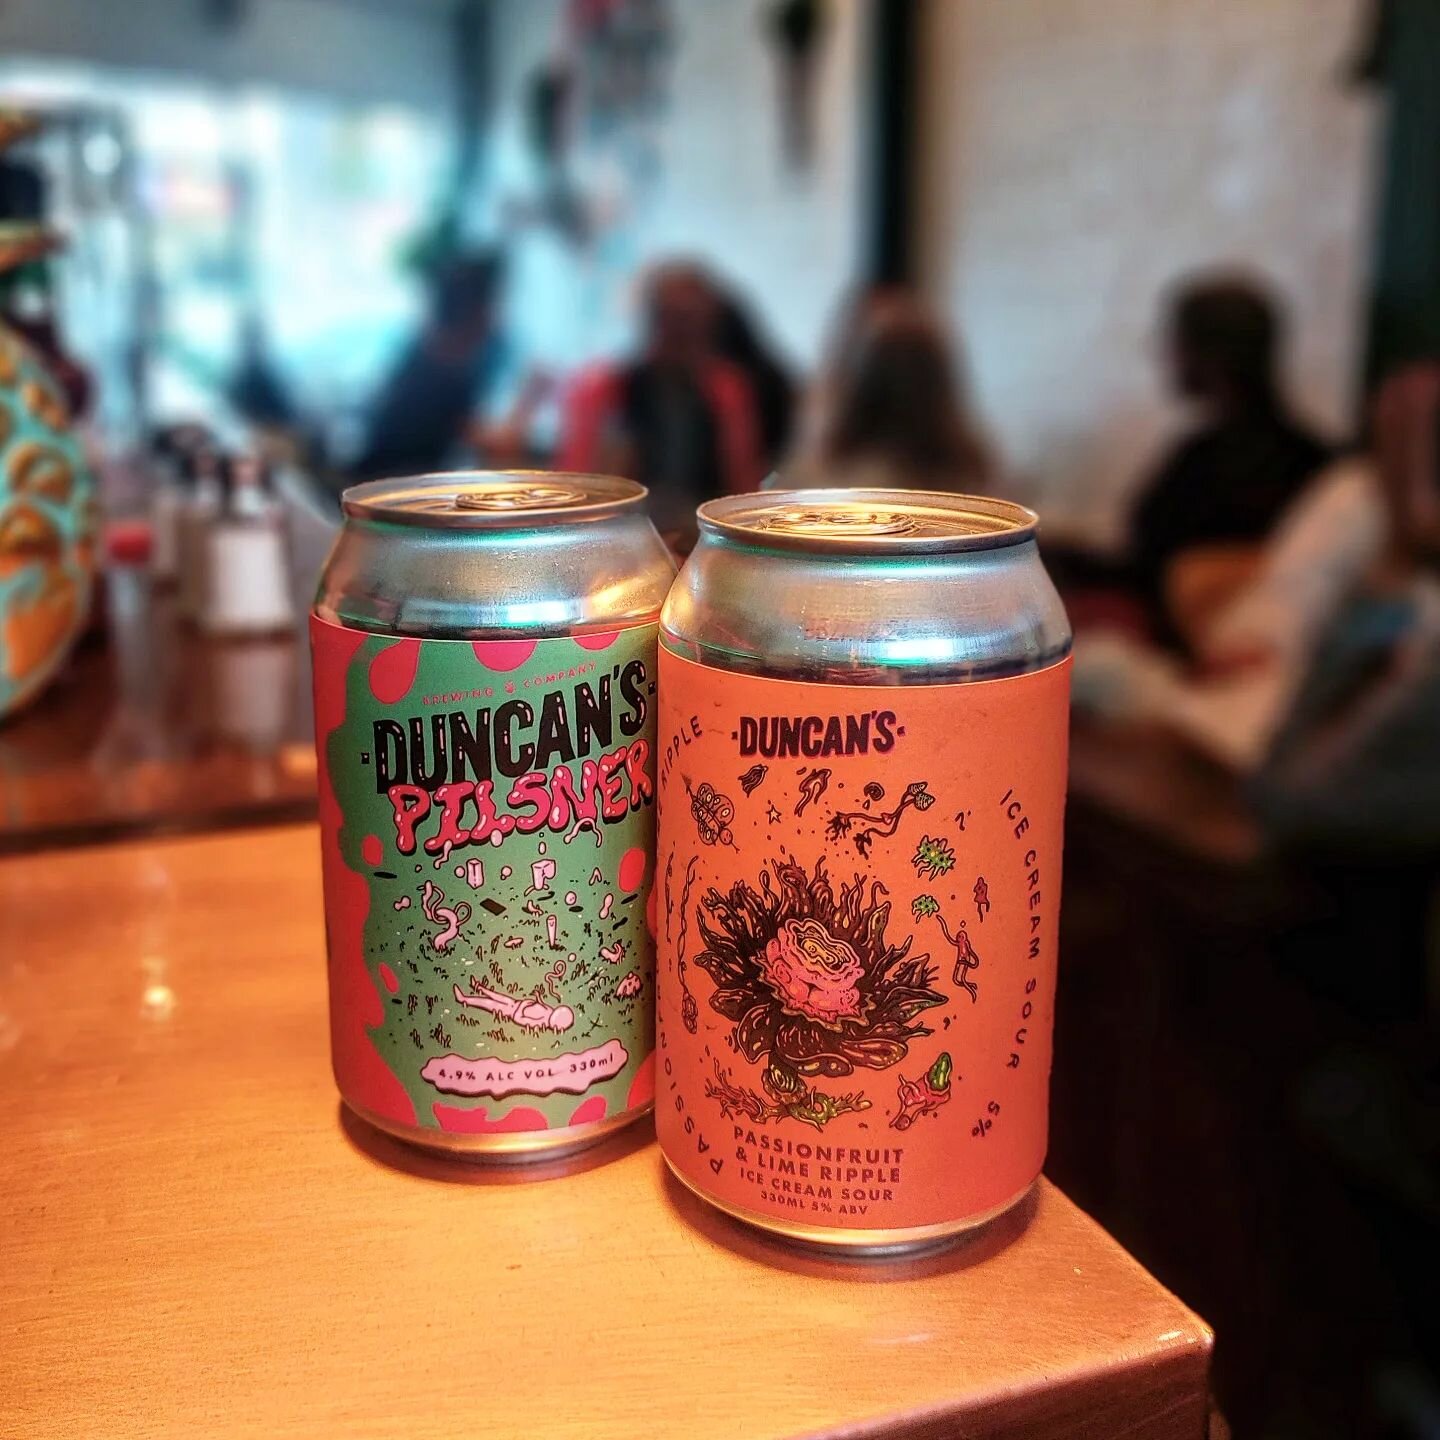 New beers, new beers! We've got some delightful new goodies from our pals at @duncansbrewing on the list 🤤

Either keep it classically delicious with a bright tasty pilsner, or funk it up with a passionfruit &amp; lime ripple ice cream sour 🤩 

And